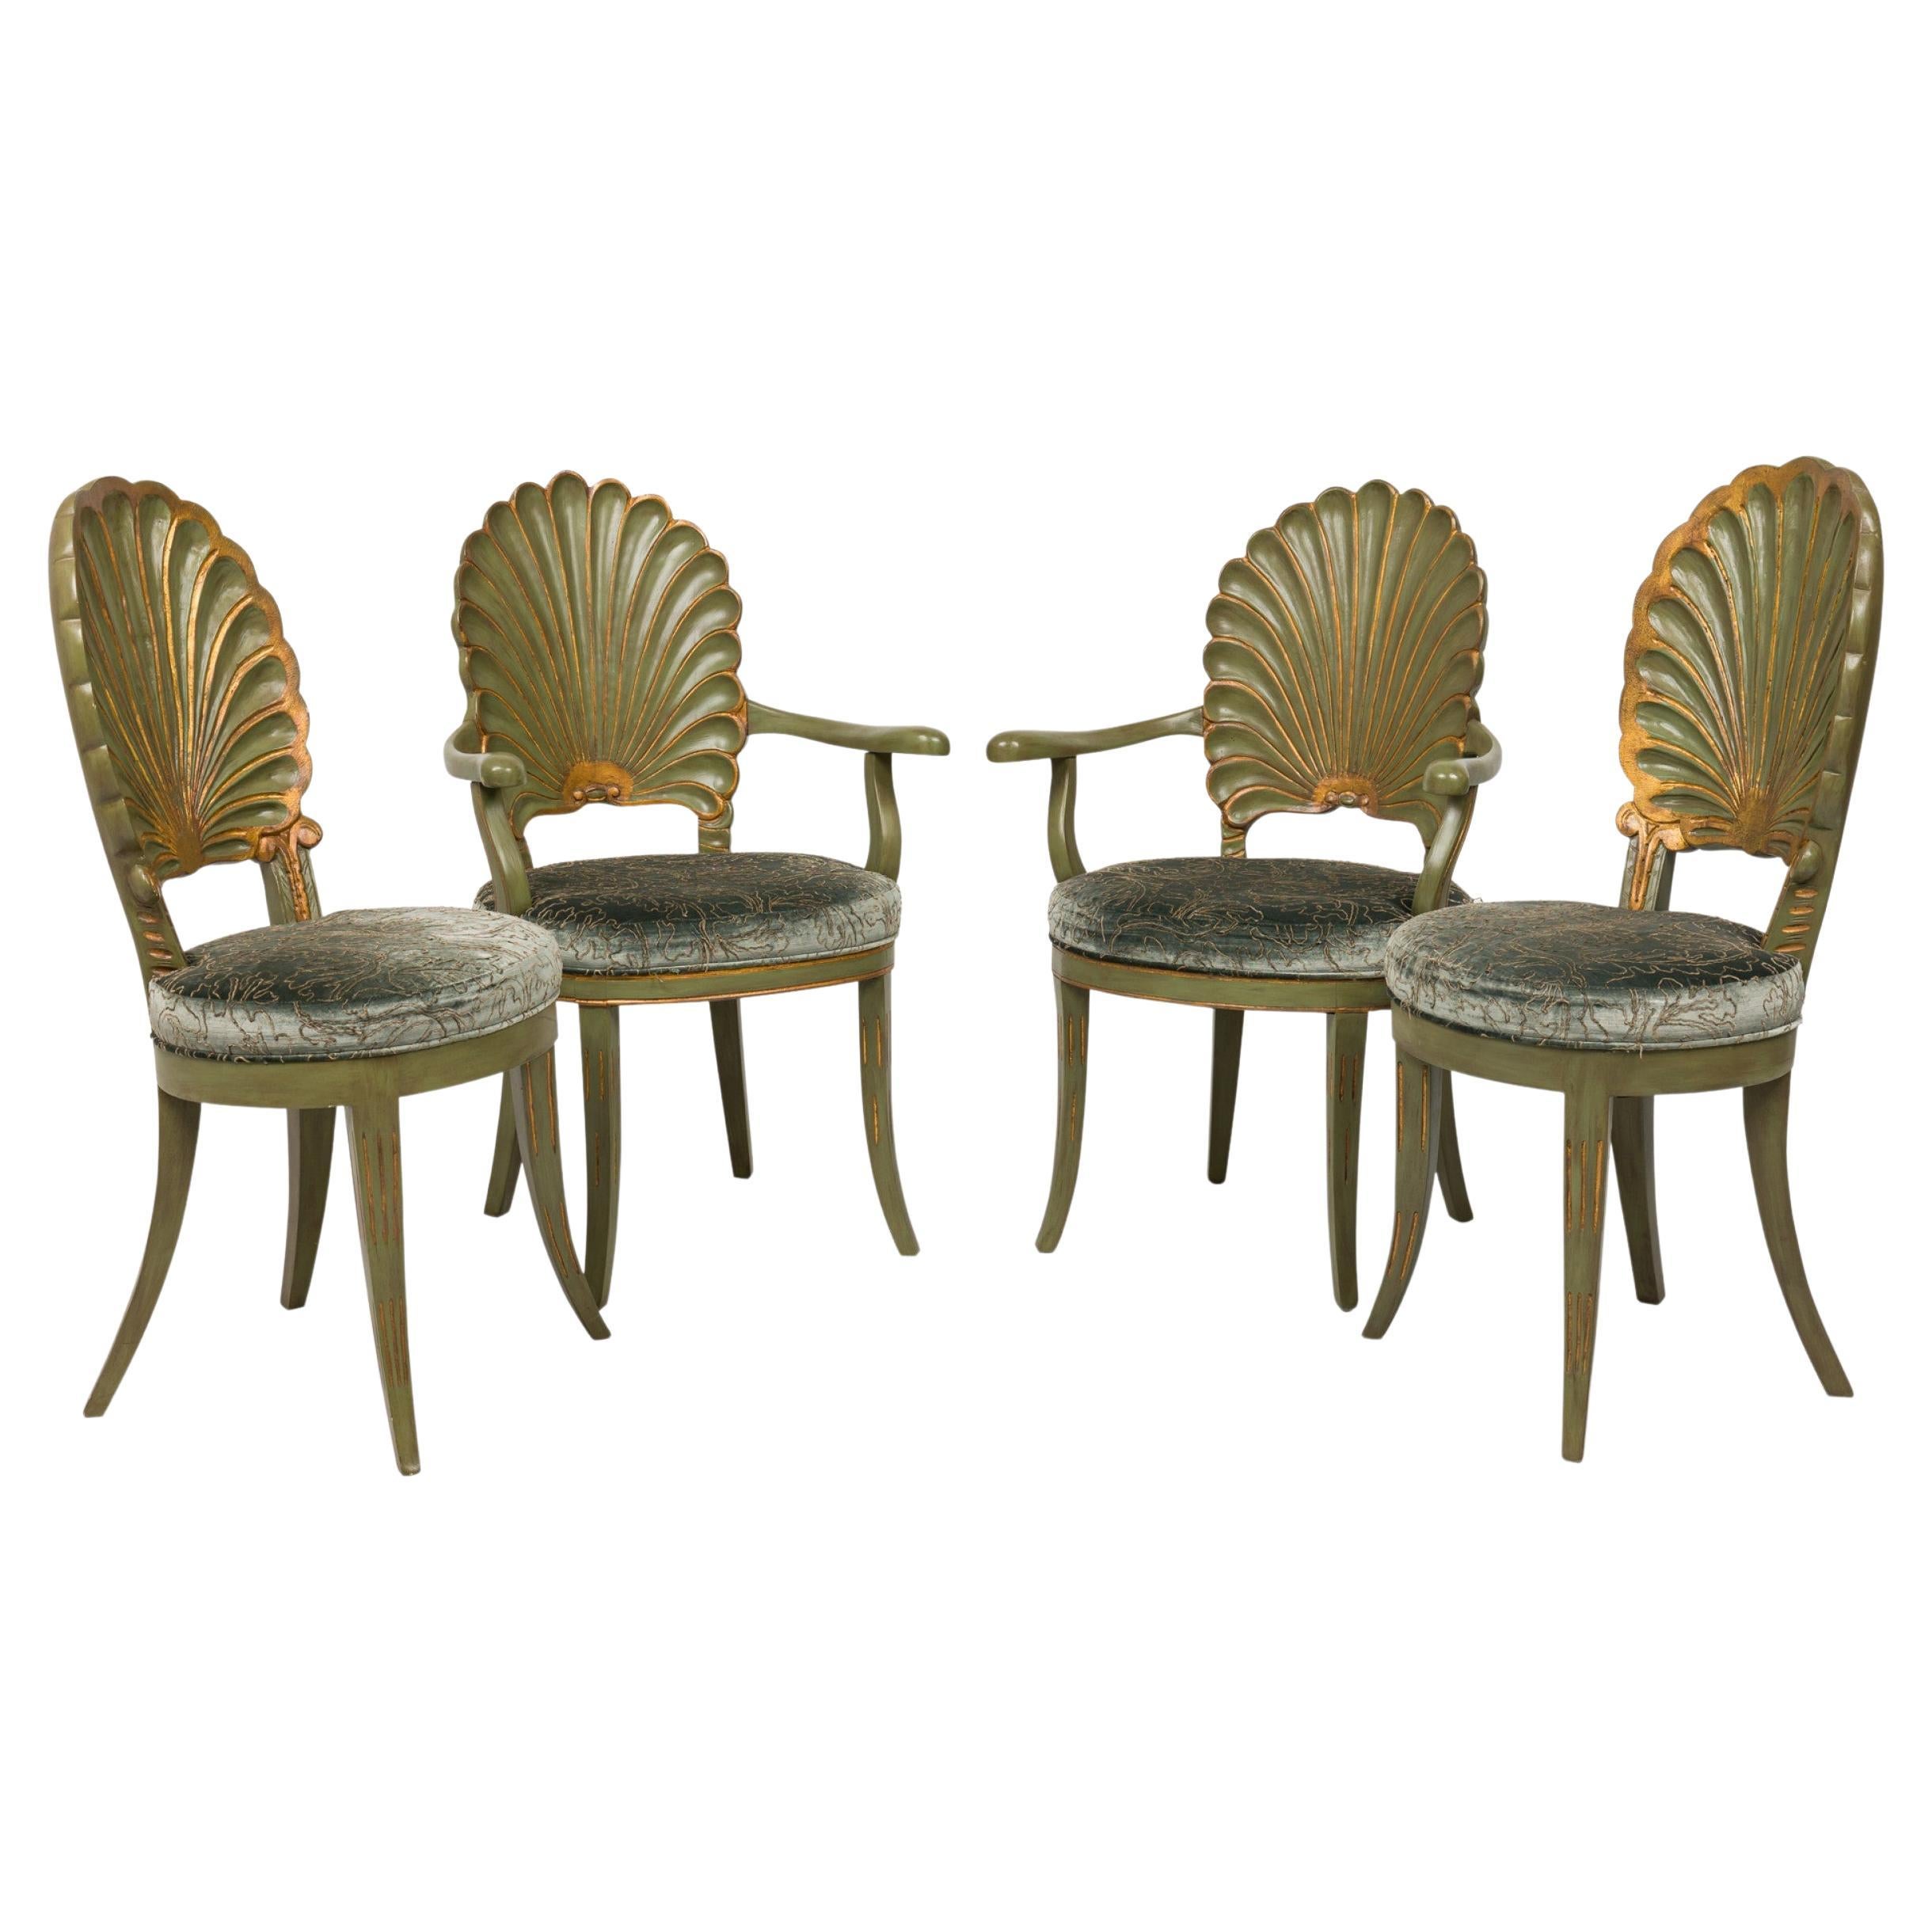 Set of 8 Italian Grotto Mid-Century Carved Wood Shellback Dining Chairs